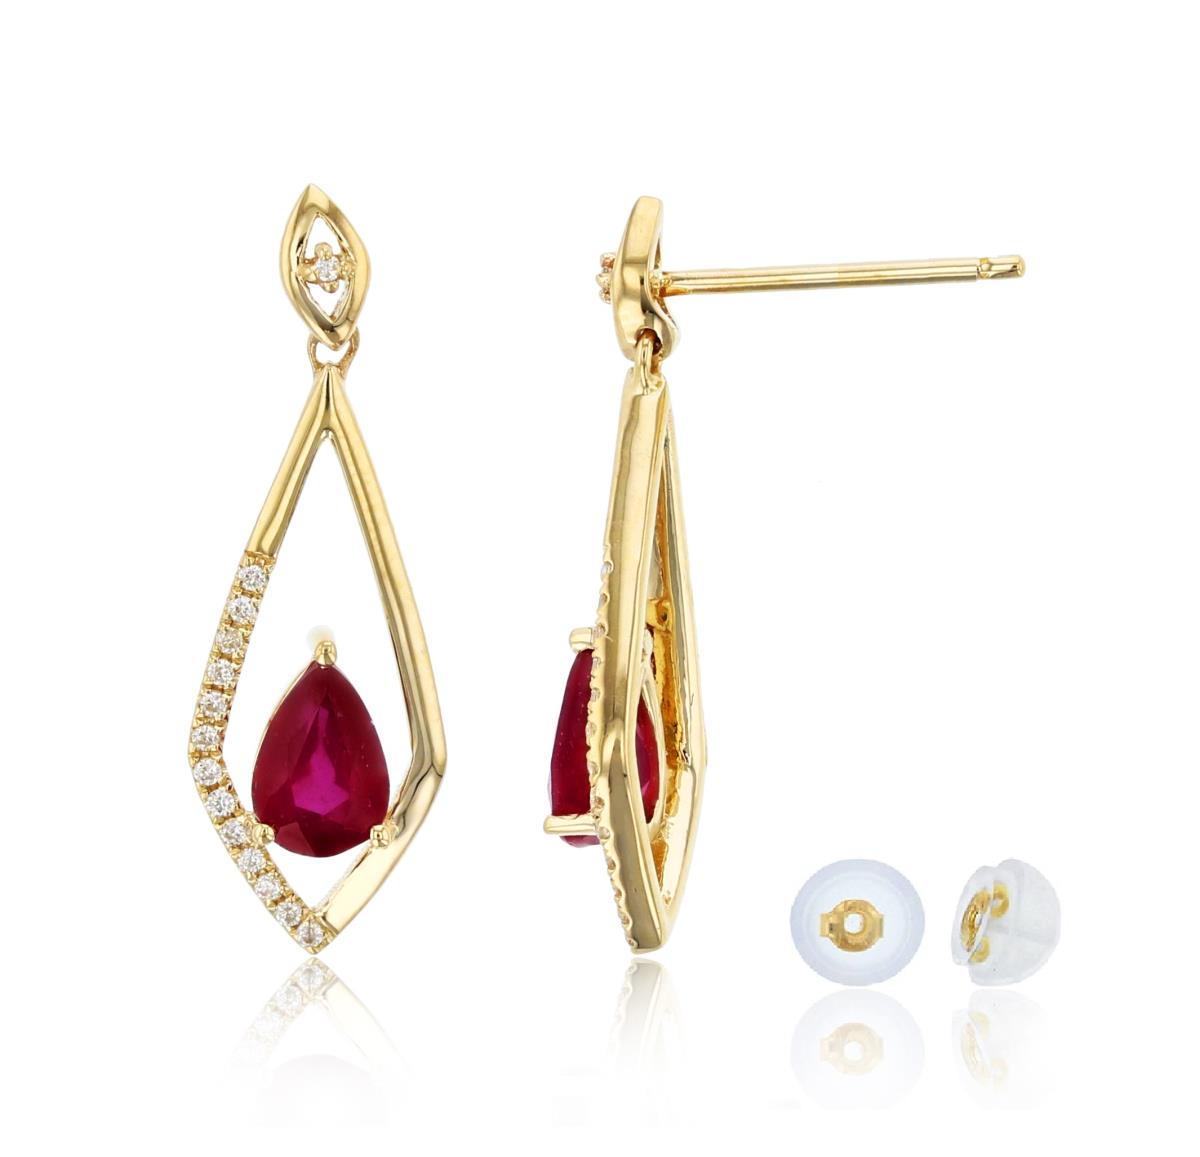 10K Yellow Gold 6x4mm Pear Cut Glass Filled Ruby & 0.09 CTTW Diamonds Open Rhombus Dangling Earring with Silicone Back